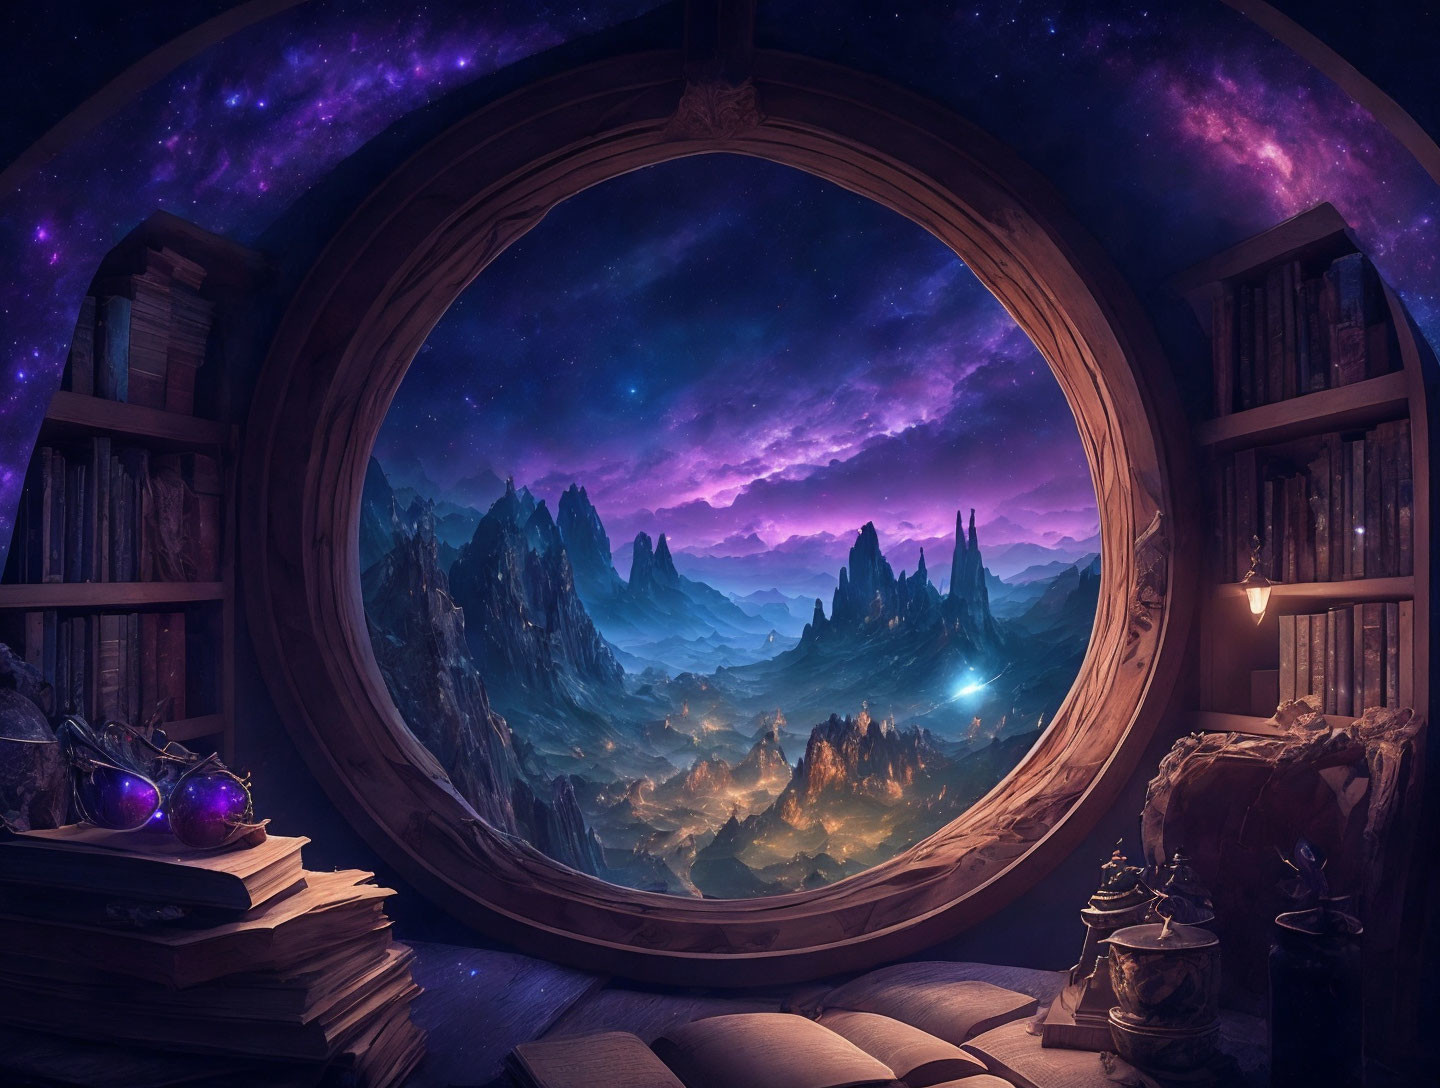 Books are portals to other worlds